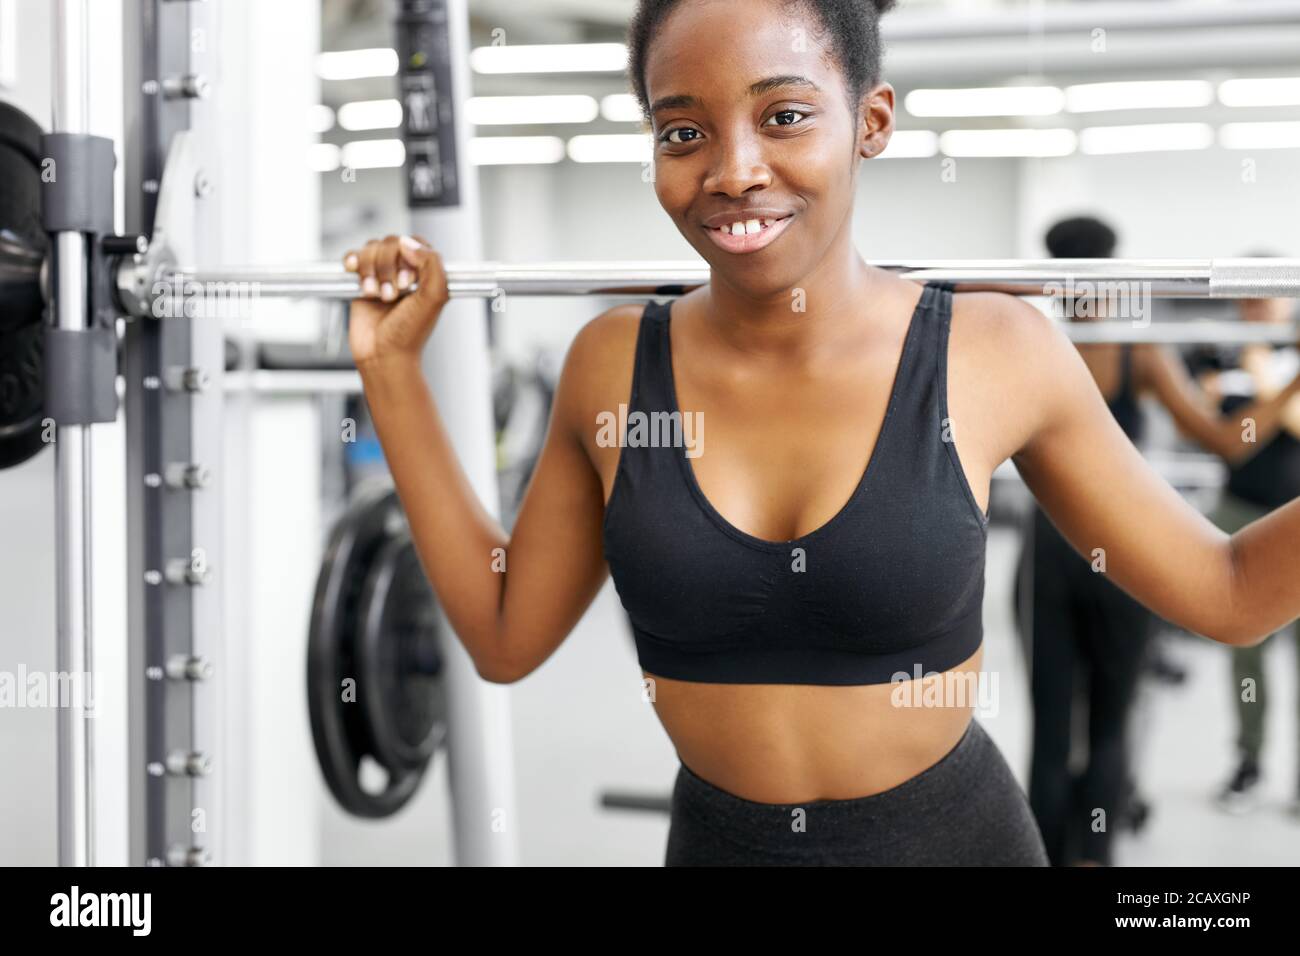 Athletic Woman Pumping Up Muscules with Dumbbells Stock Photo